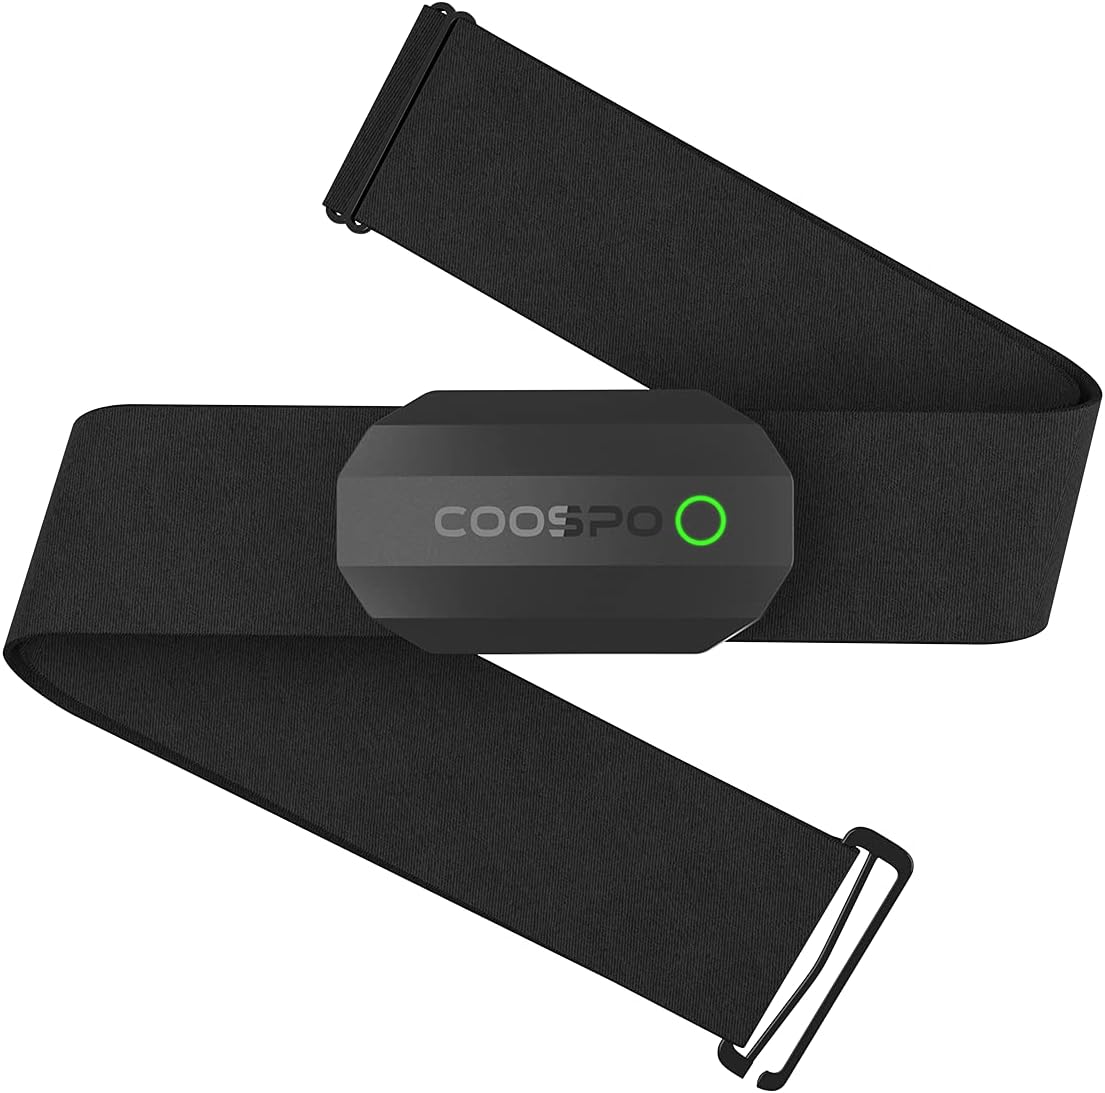 COOSPO Bluetooth Heart Rate Monitor Chest Strap H808S, [...]